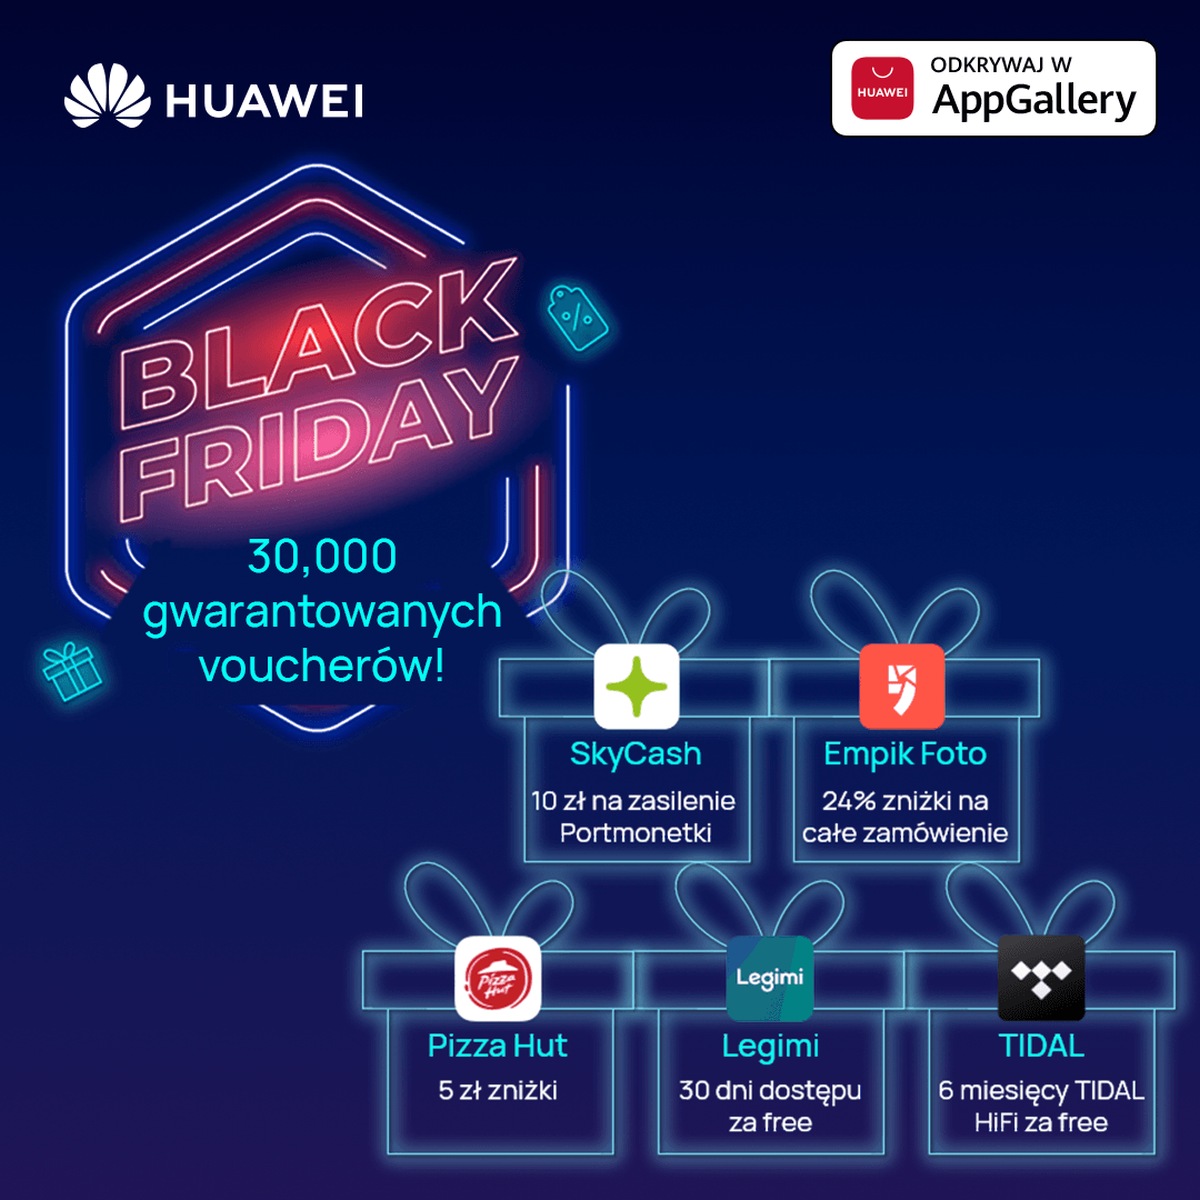 Huawei Black Friday AppGallery baner